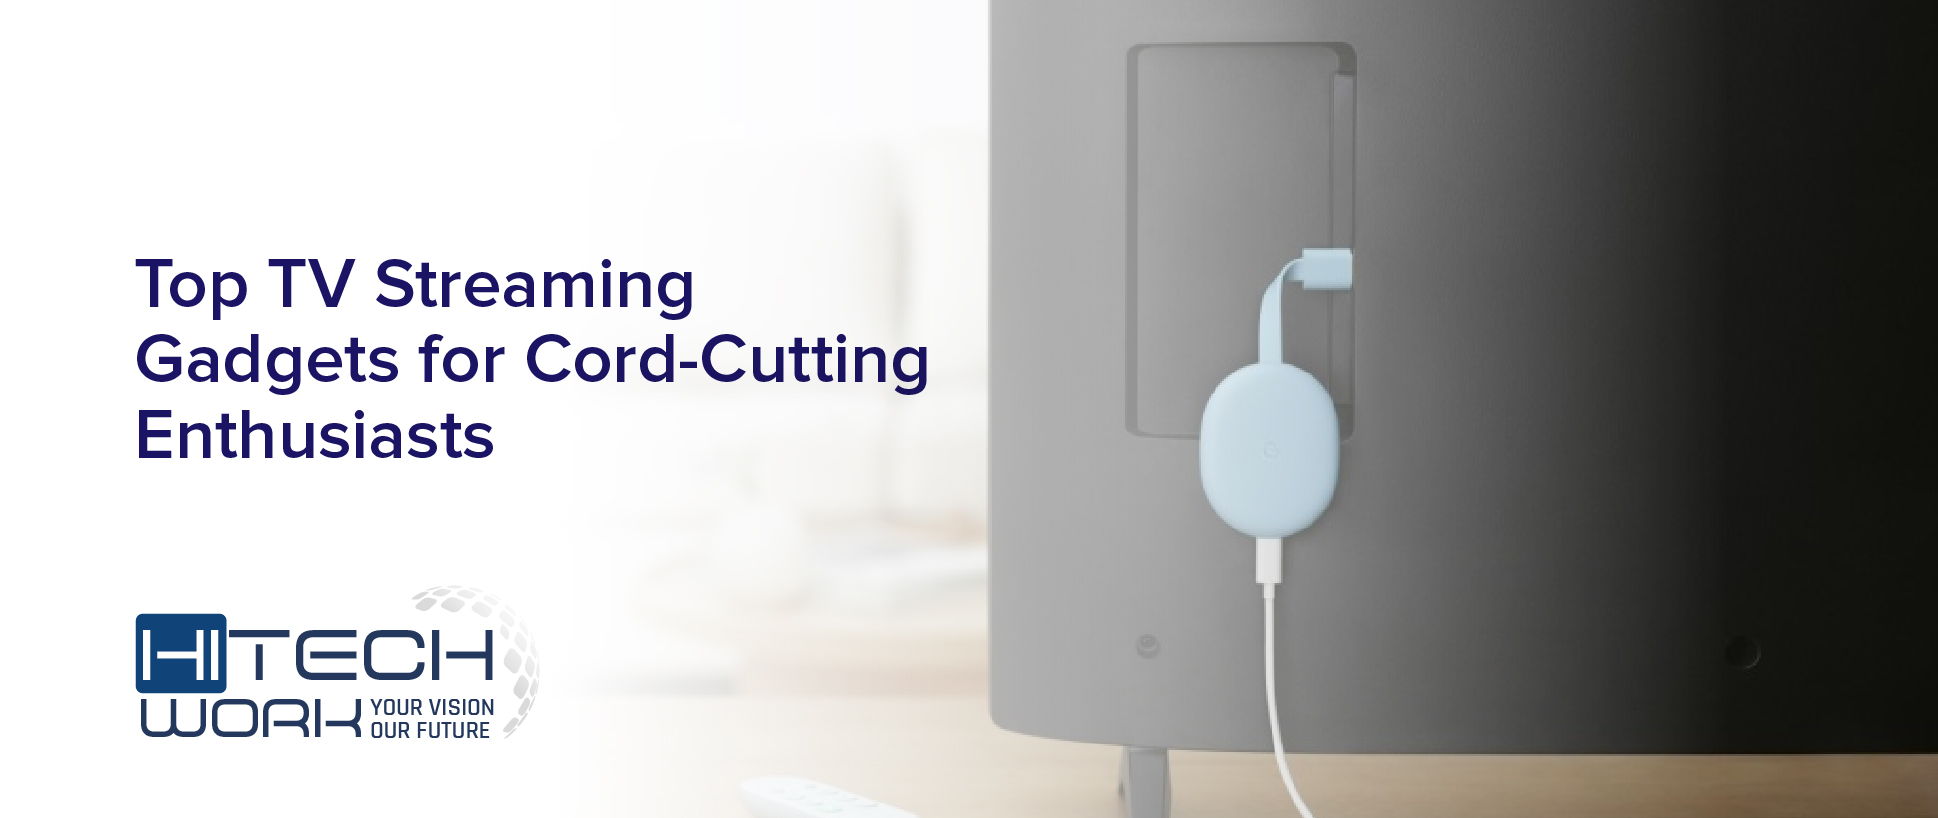 Cord-Cutting Enthusiasts